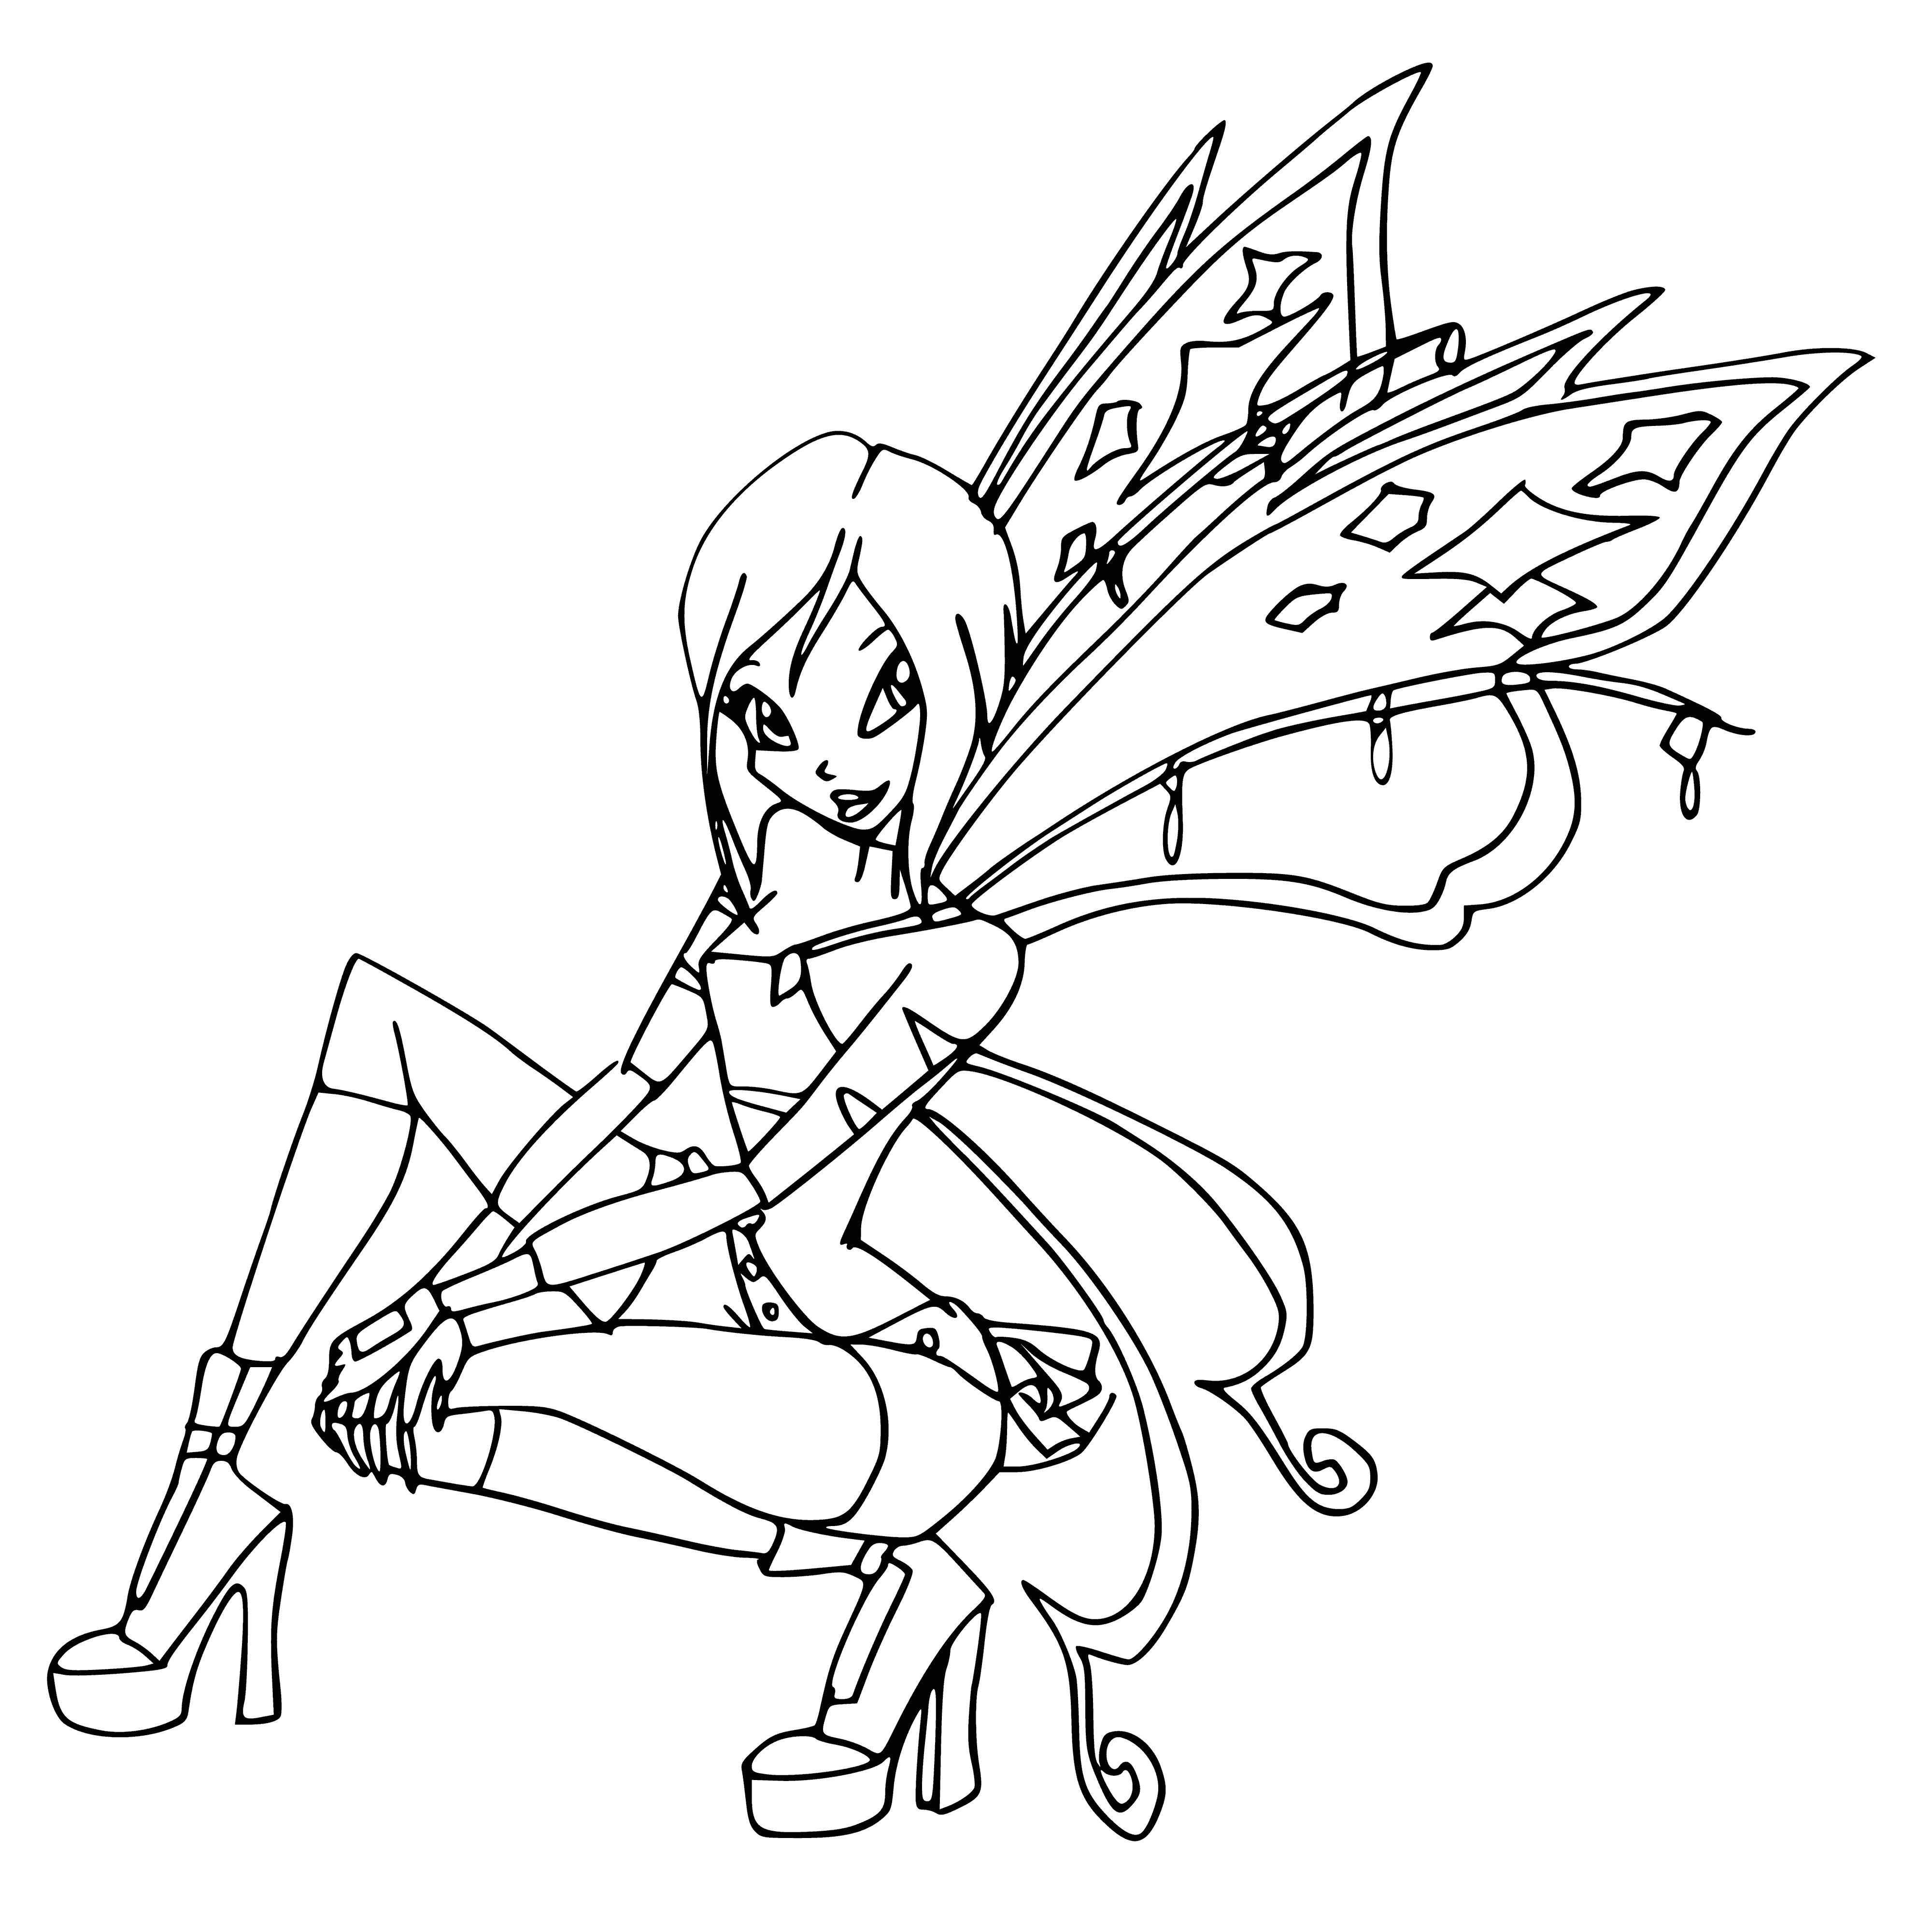 coloring page: Tecna is a winged girl with blue hair, in a blue and white outfit, flying in the air. #fairy #magical #wings